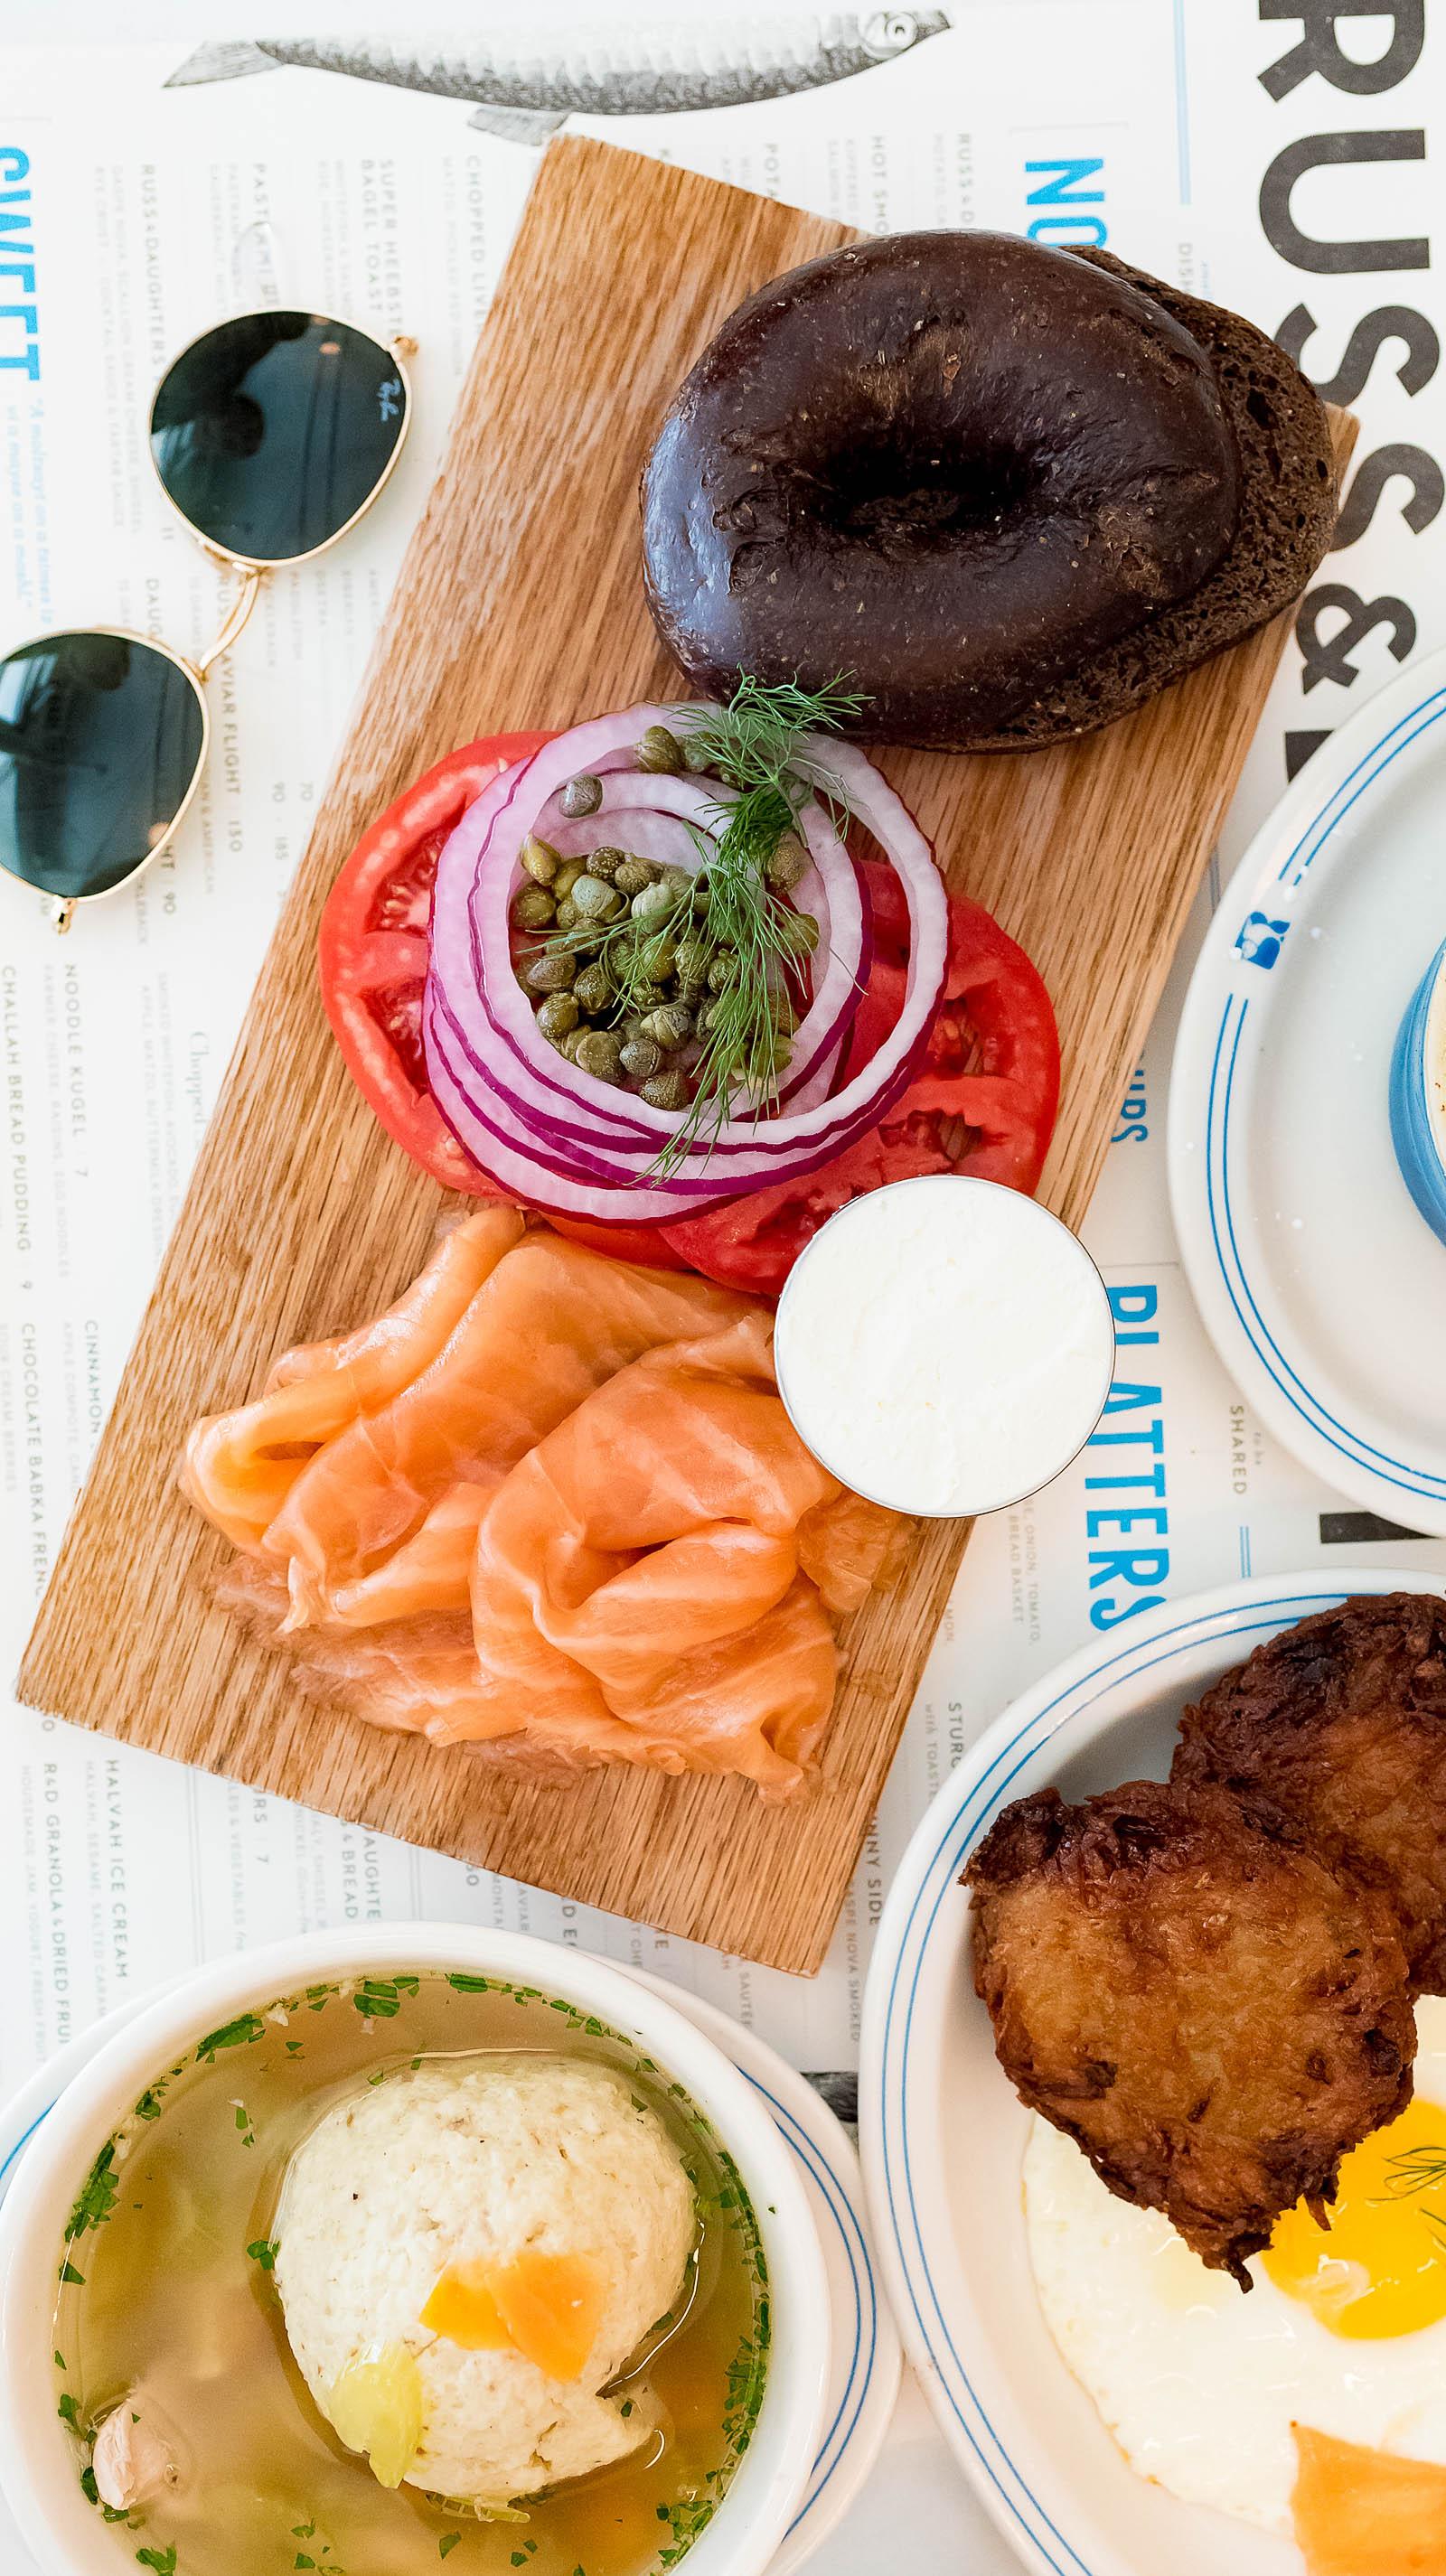 Russ & Daughters Cafe NYC